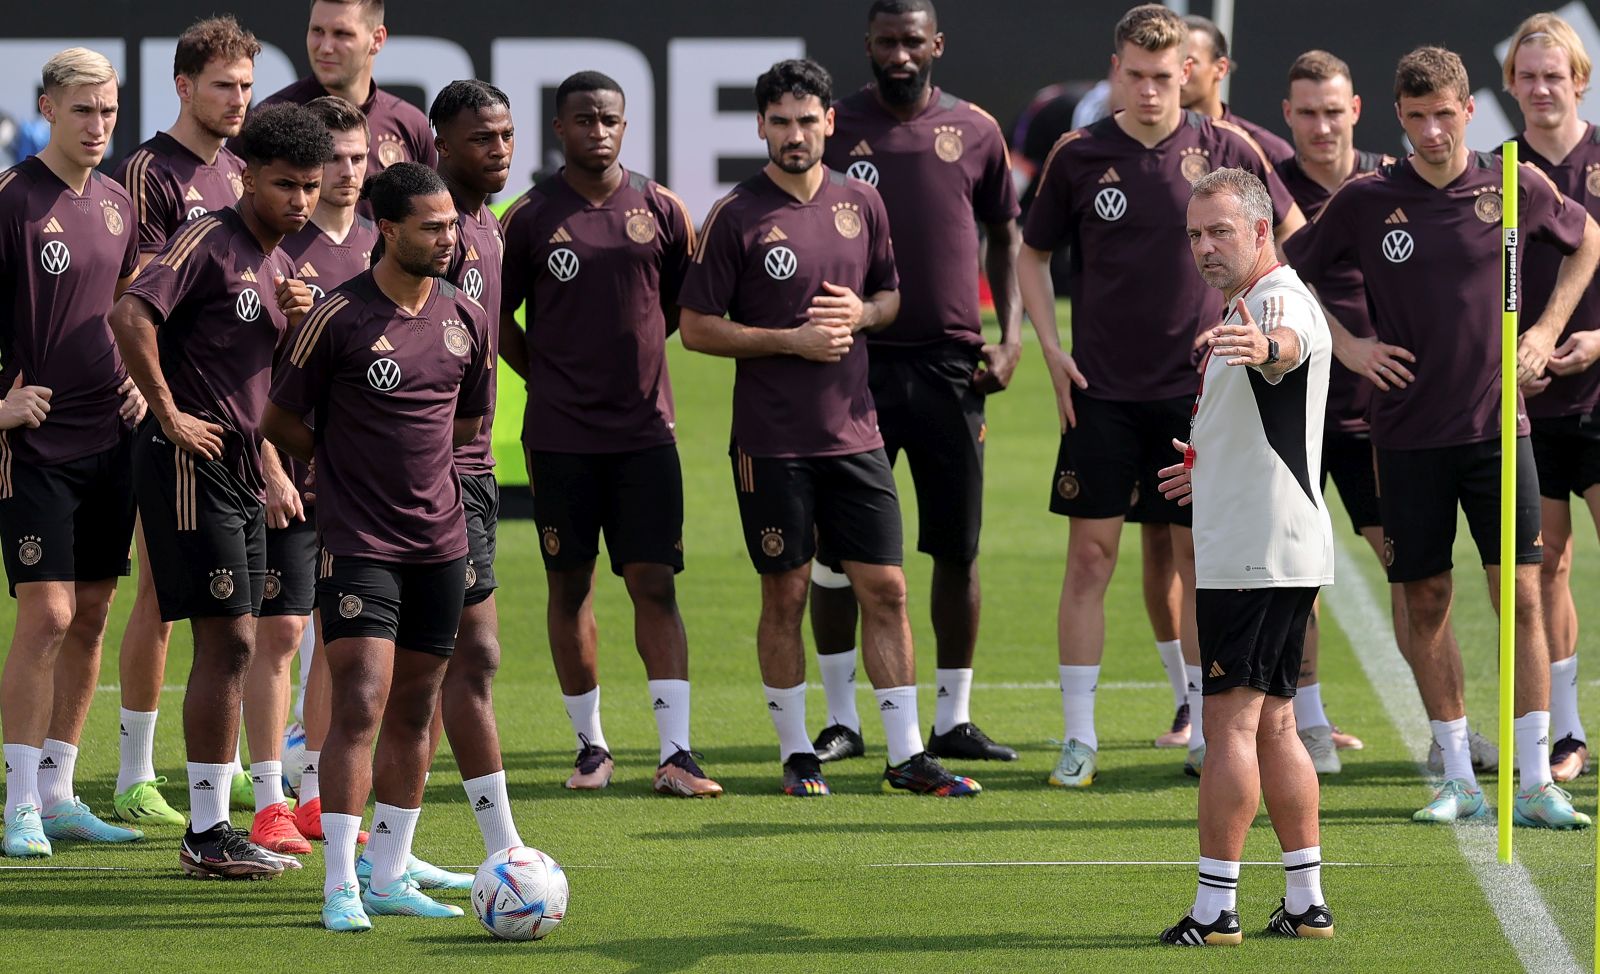 epa10313859 Germany's head coach Hansi Flick (front-R) talks to players during the team's training session in Al Ruwais, Qatar, 19 November 2022. Germany is preparing for the FIFA World Cup 2022 in Qatar with their first match against Japan set for 23 November. The FIFA World Cup Qatar 2022 will take place from 20 November to 18 December 2022 in Qatar.  EPA/FRIEDEMANN VOGEL